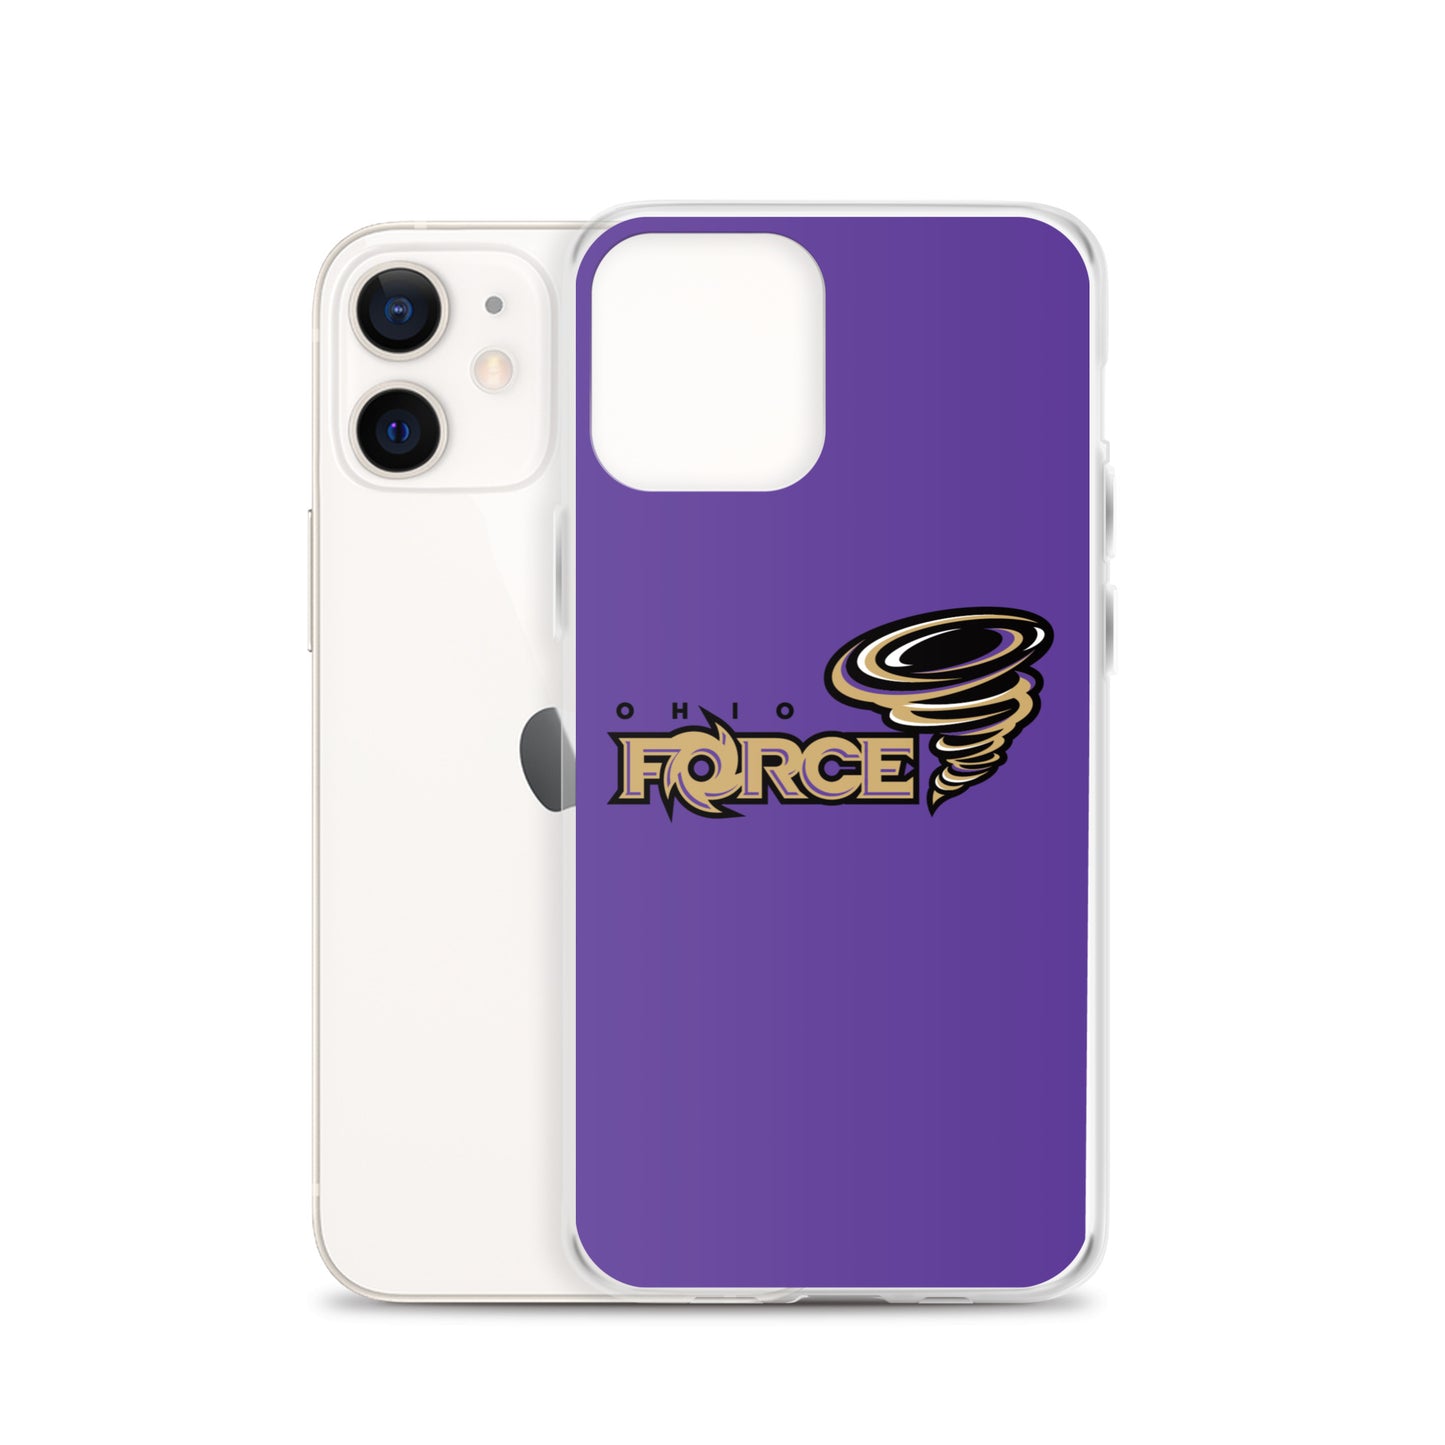 Force iPhone Case